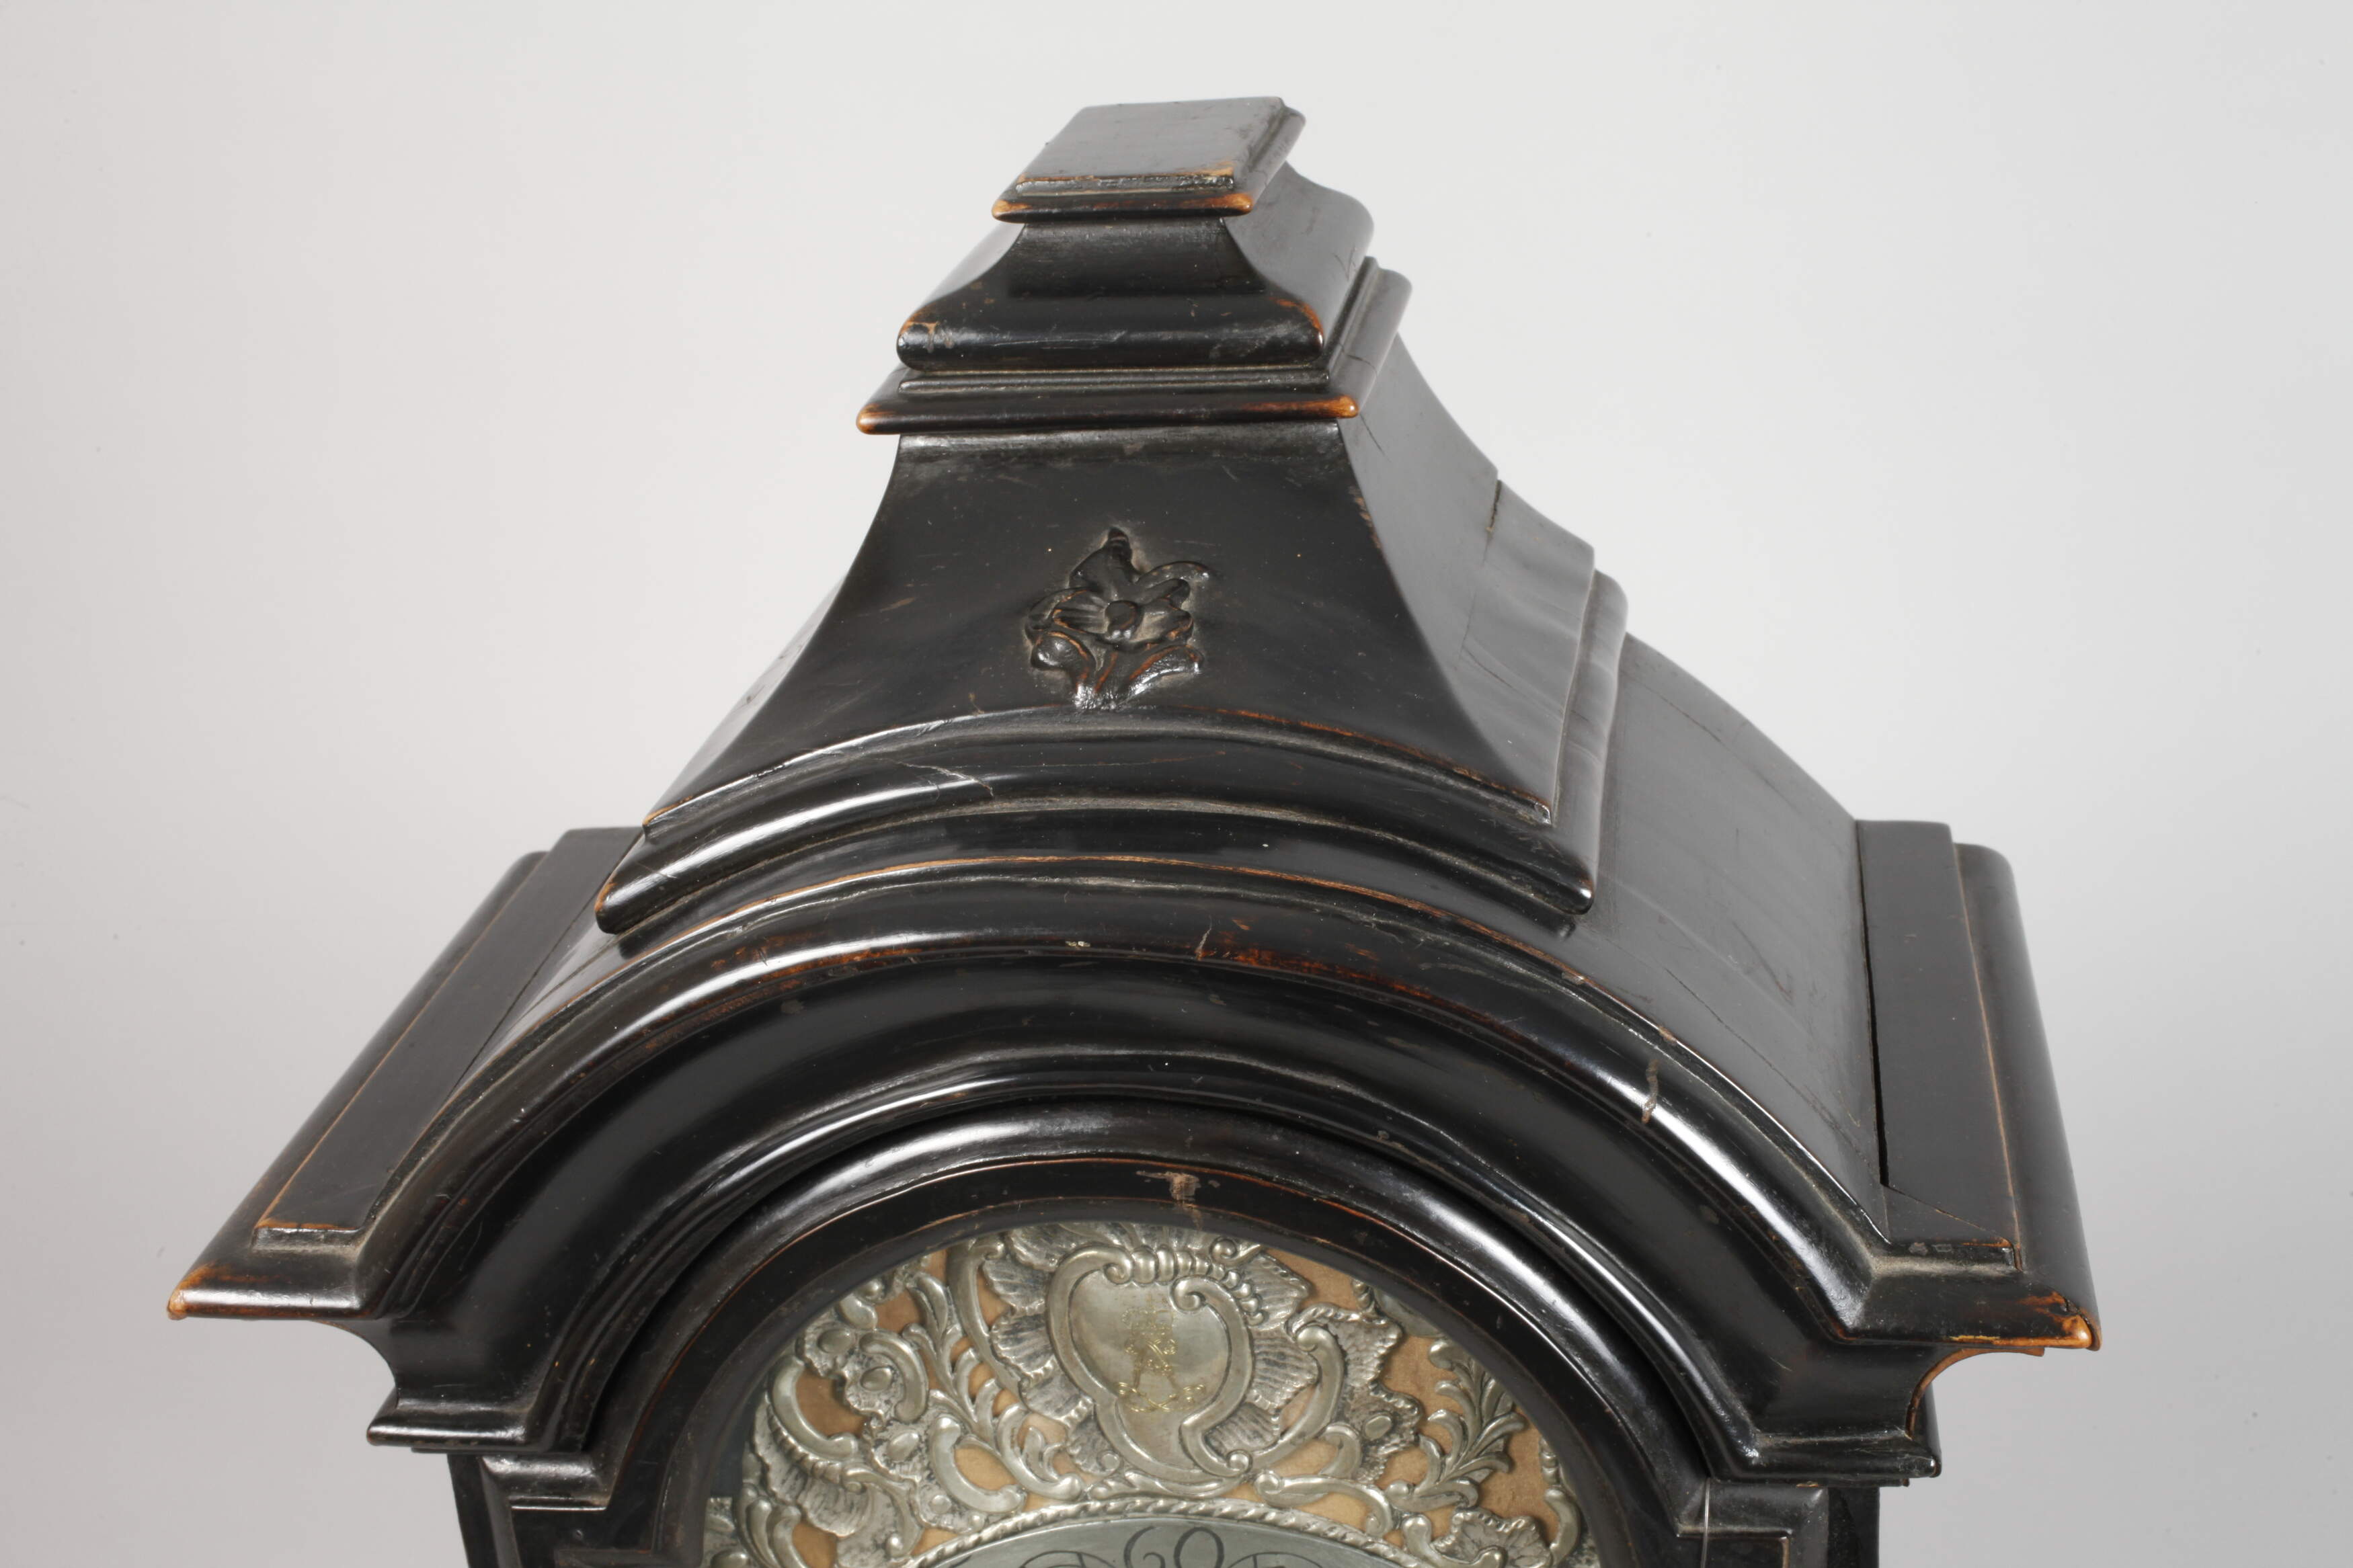 Baroque mare clock with Hessian aristocratic coat of arms - Image 2 of 7